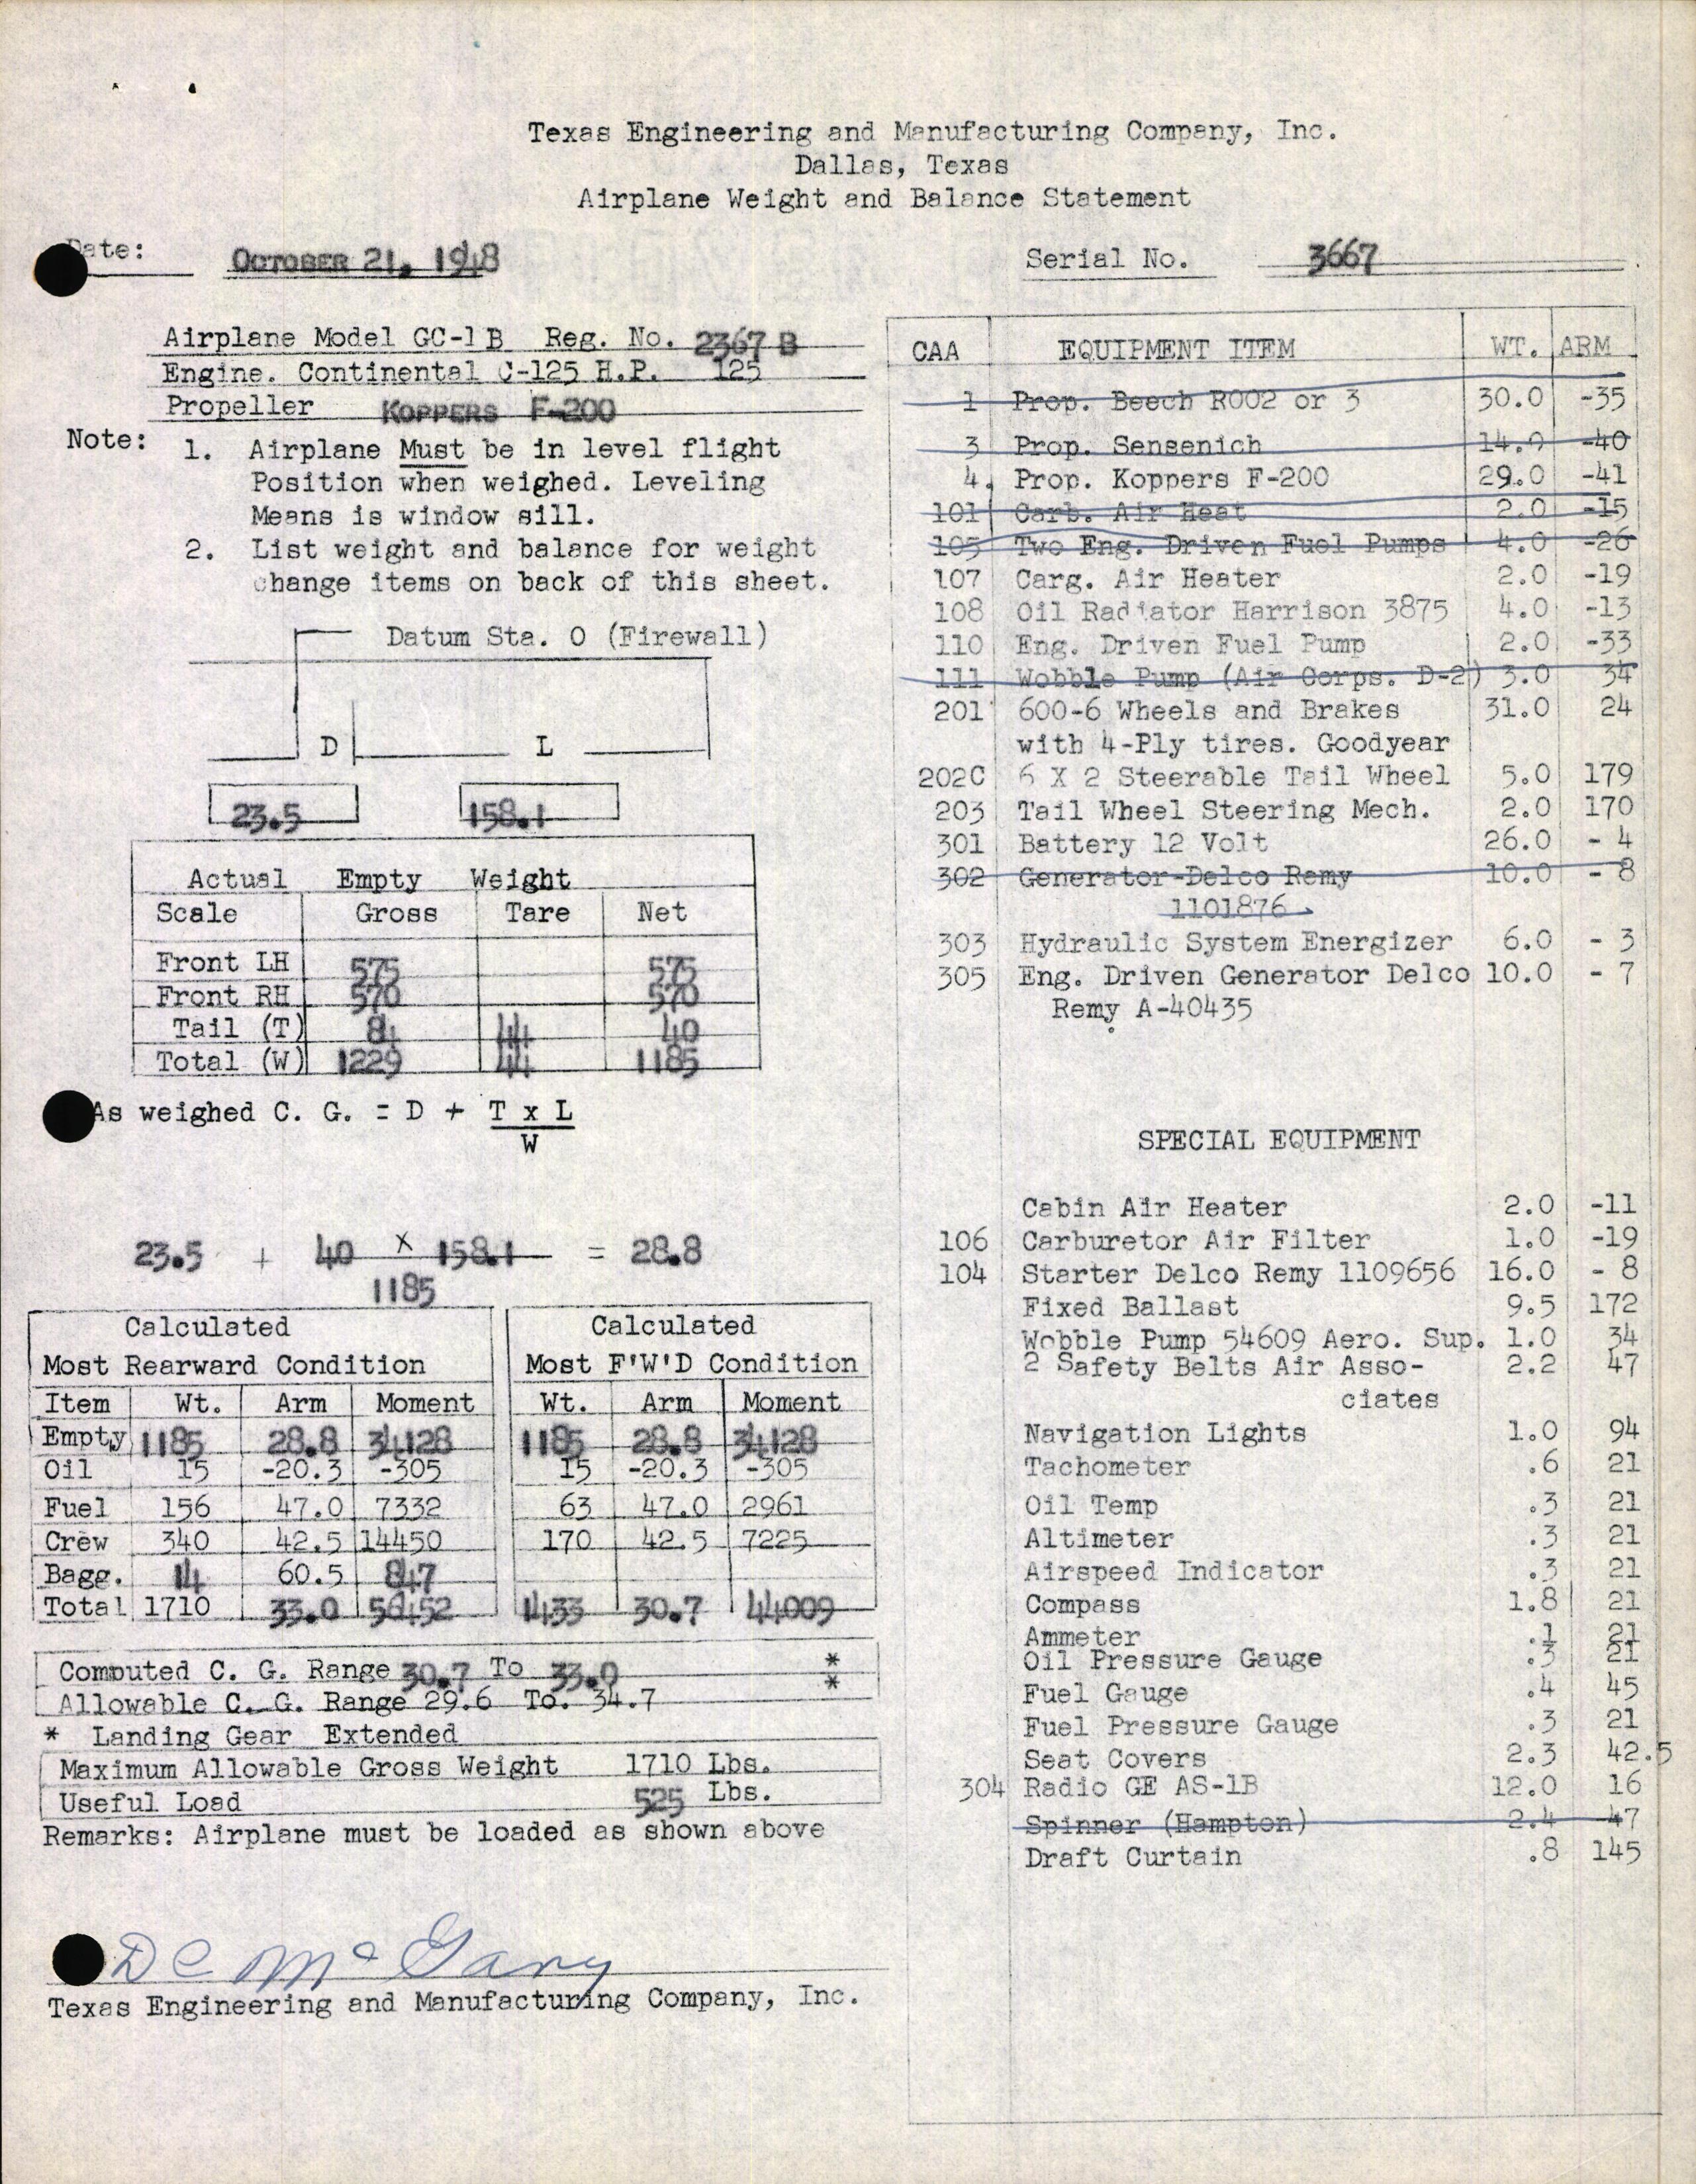 Sample page 3 from AirCorps Library document: Technical Information for Serial Number 3667